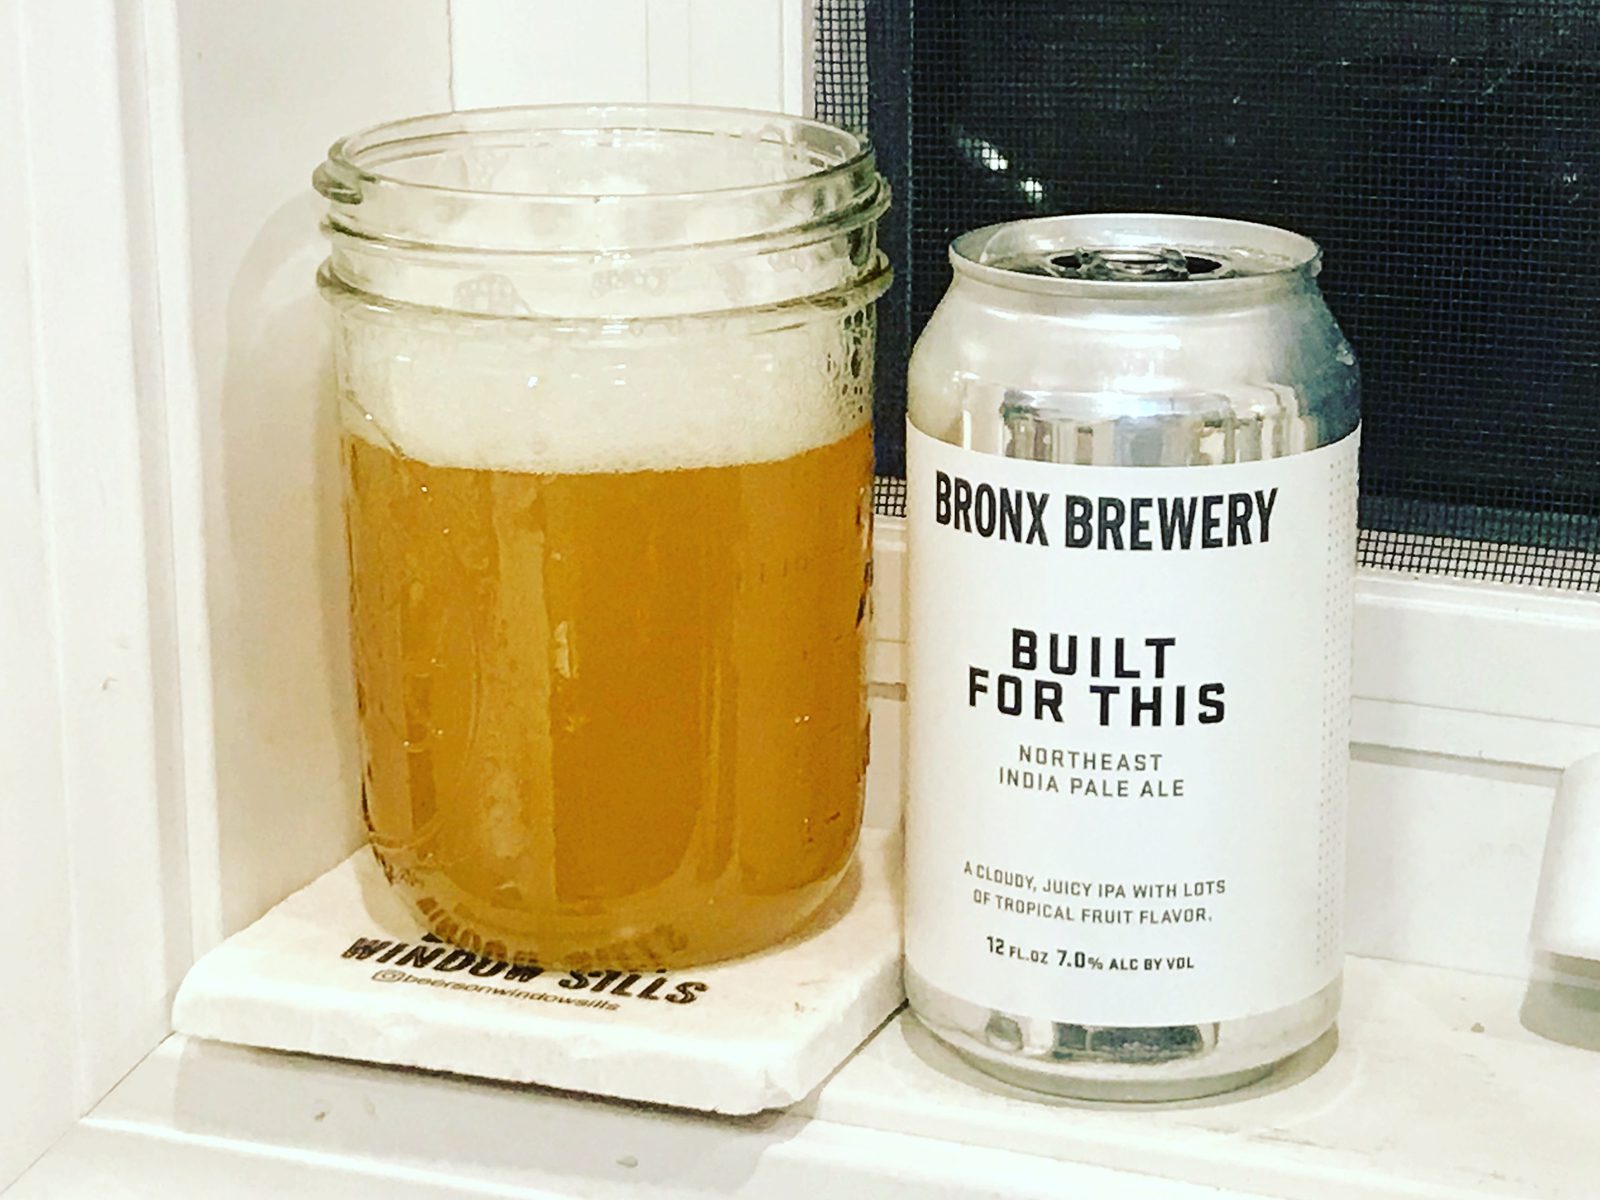 The Bronx Brewery: Built For This